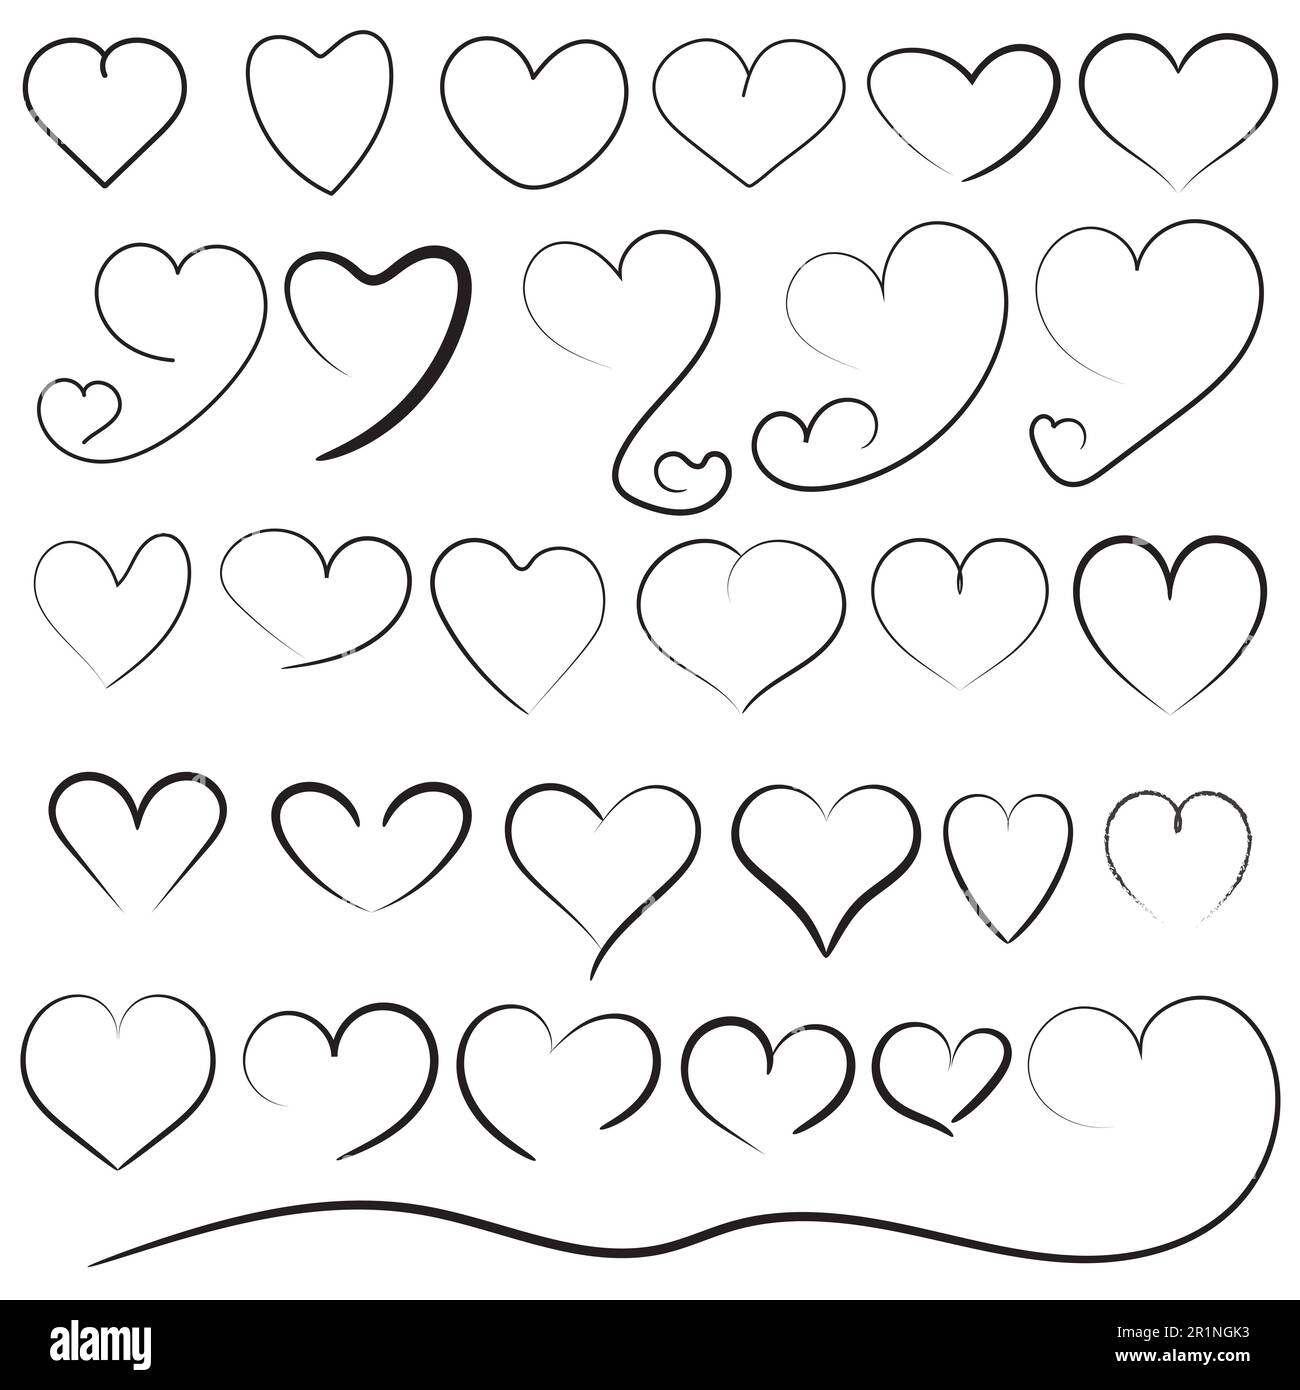 Set of Heart shape with sketch or hand drawing icon, different love hearts drawing collection vector design on white background Stock Photo